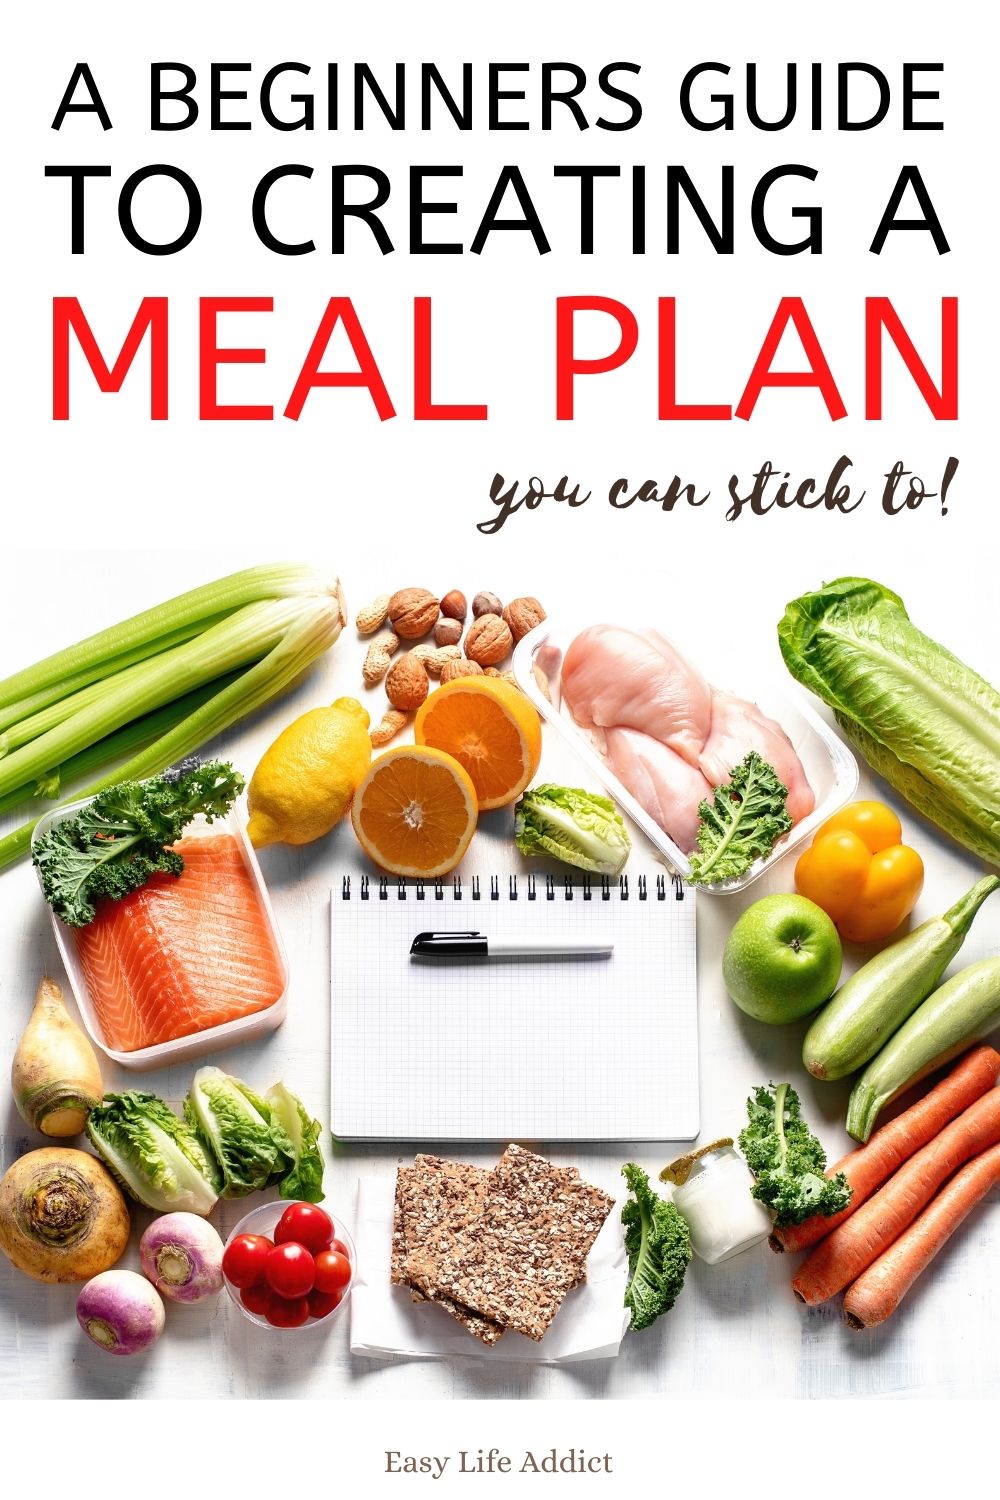 A complete guide to creating a meal plan for beginners